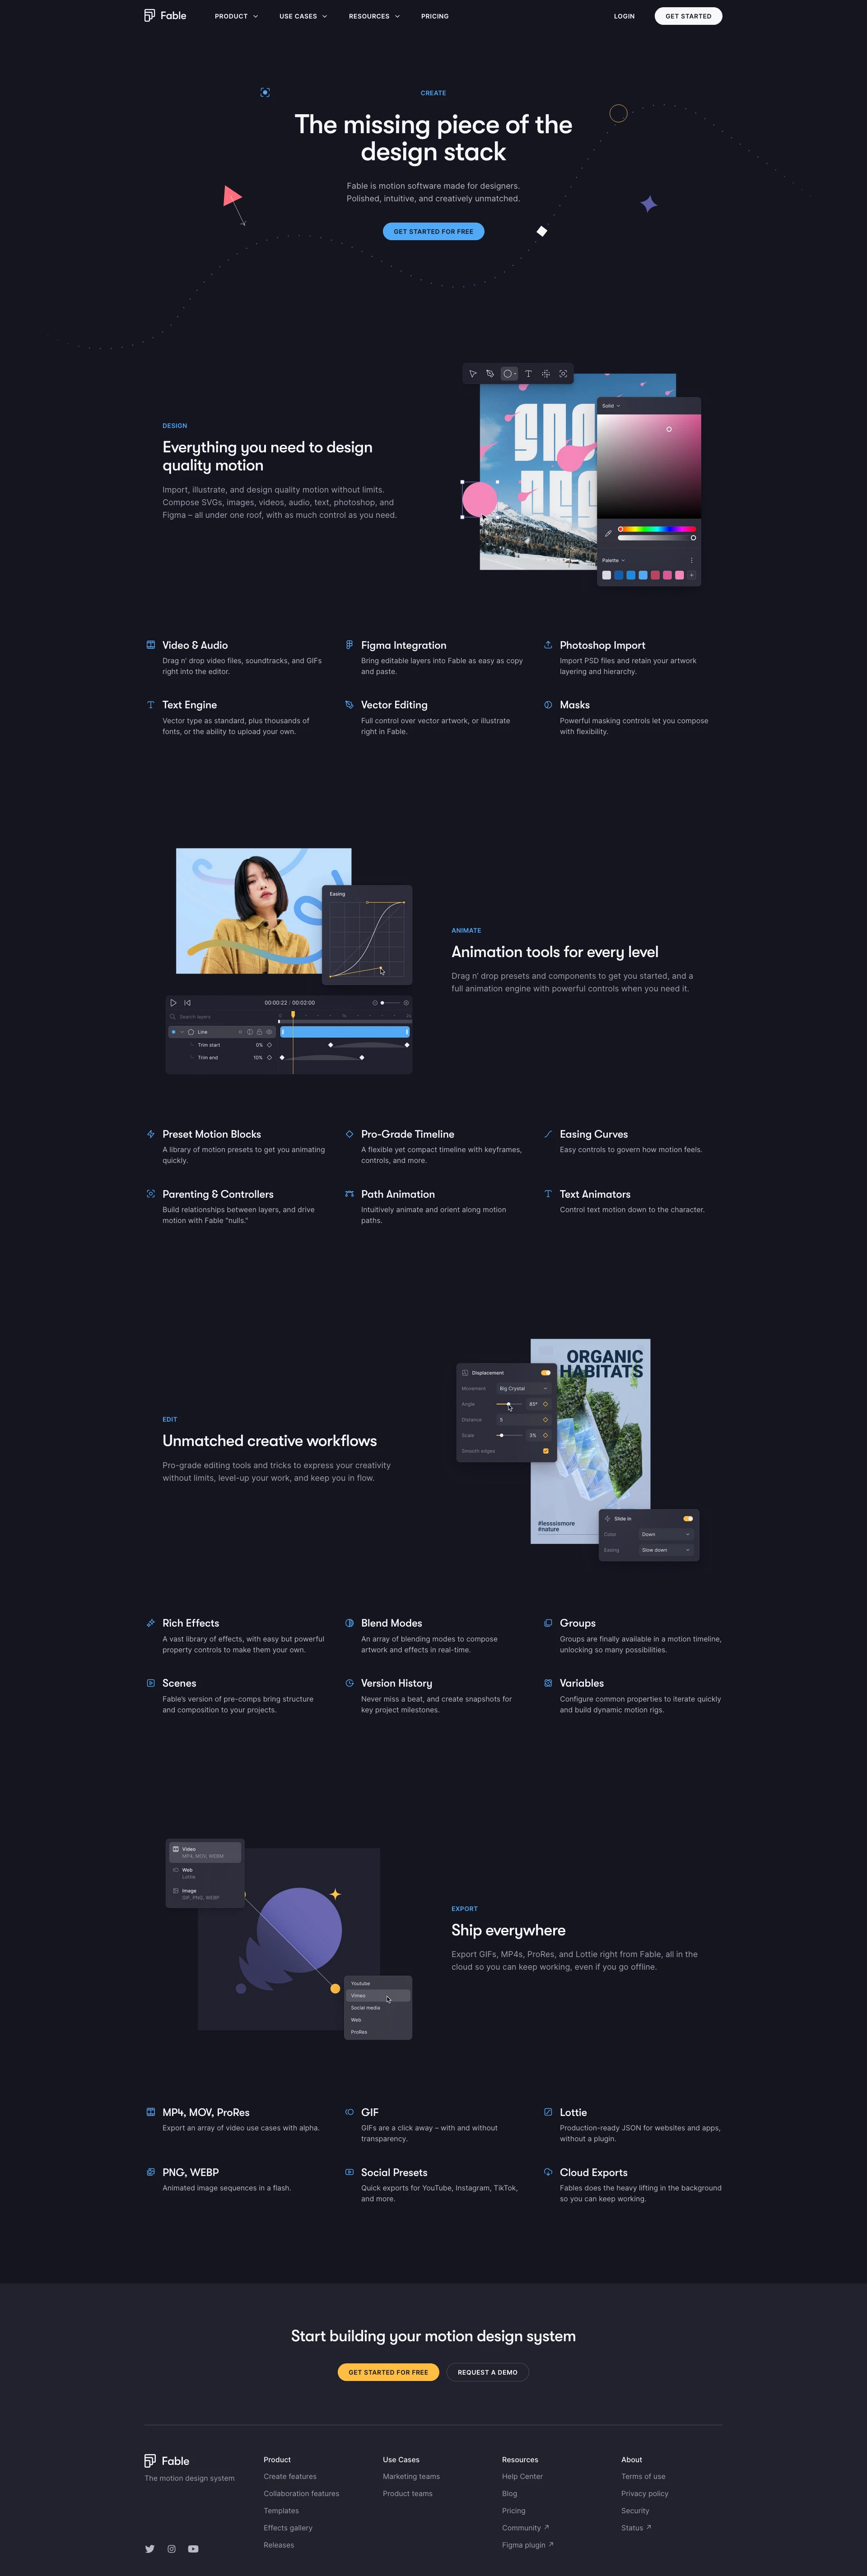 Fable Landing Page Example: The motion design system. Fable is how creative teams make motion together. Design, collaborate, and scale – all under one roof.